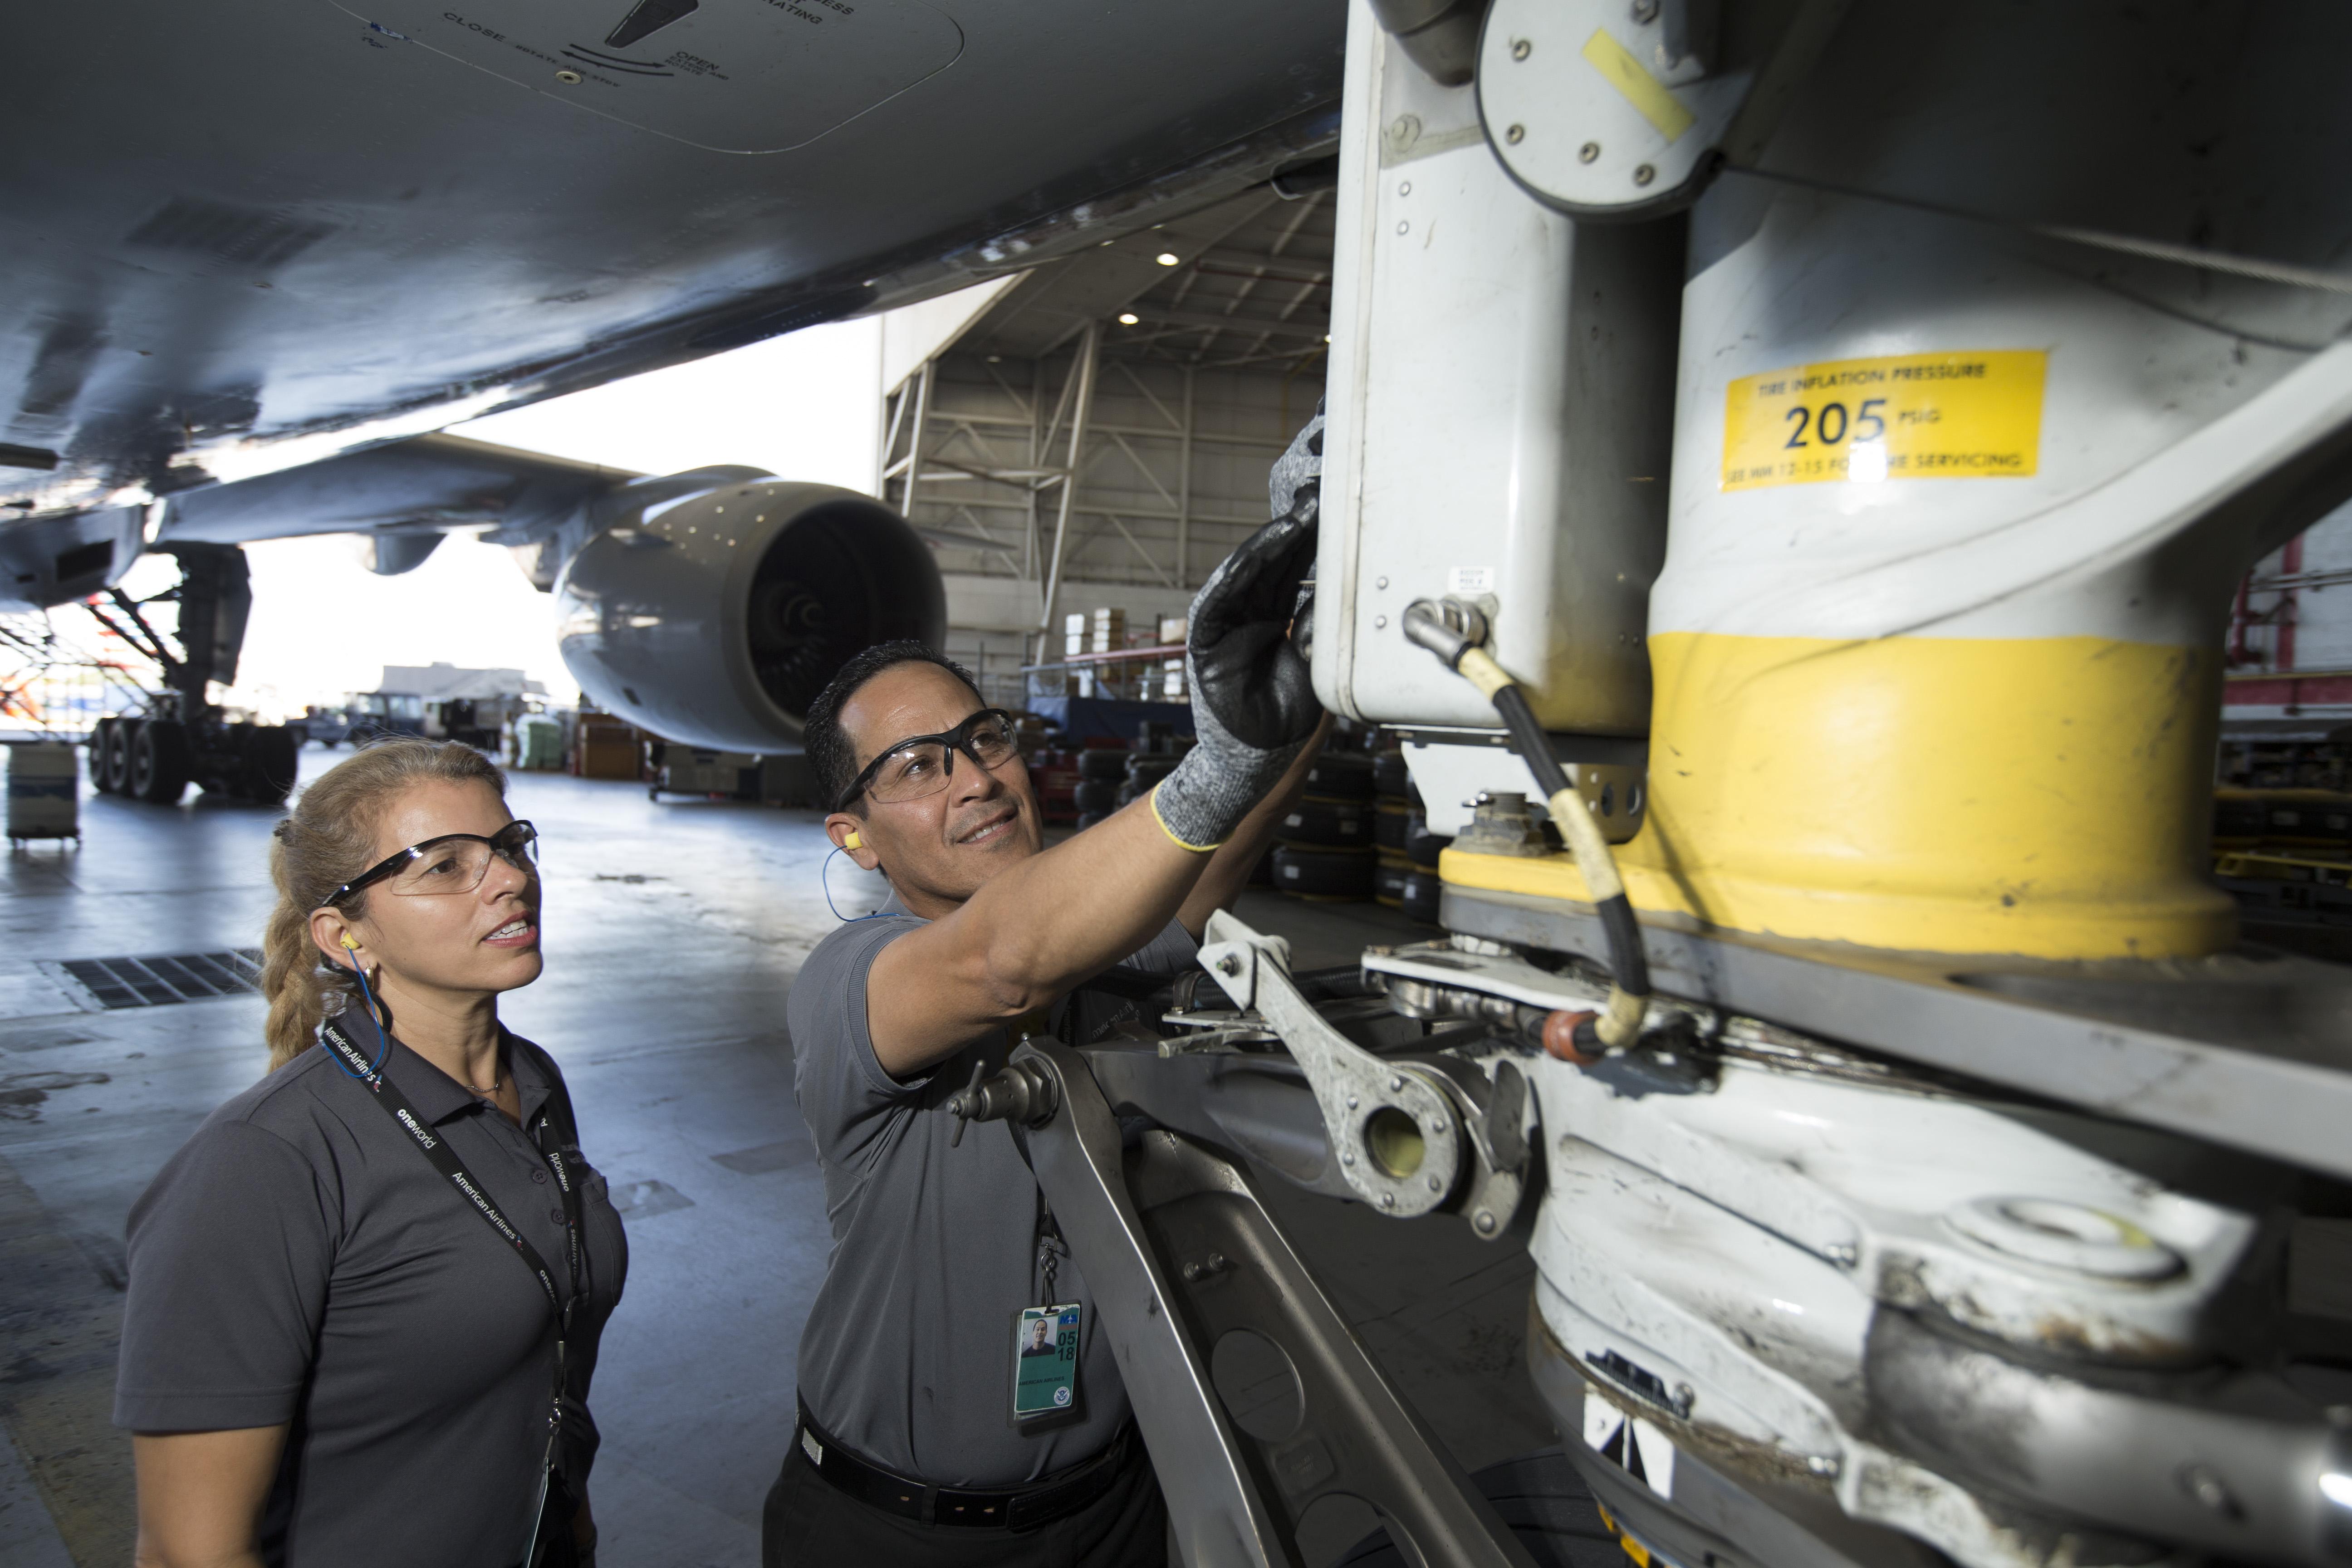 American Airlines maintenance checking aircraft